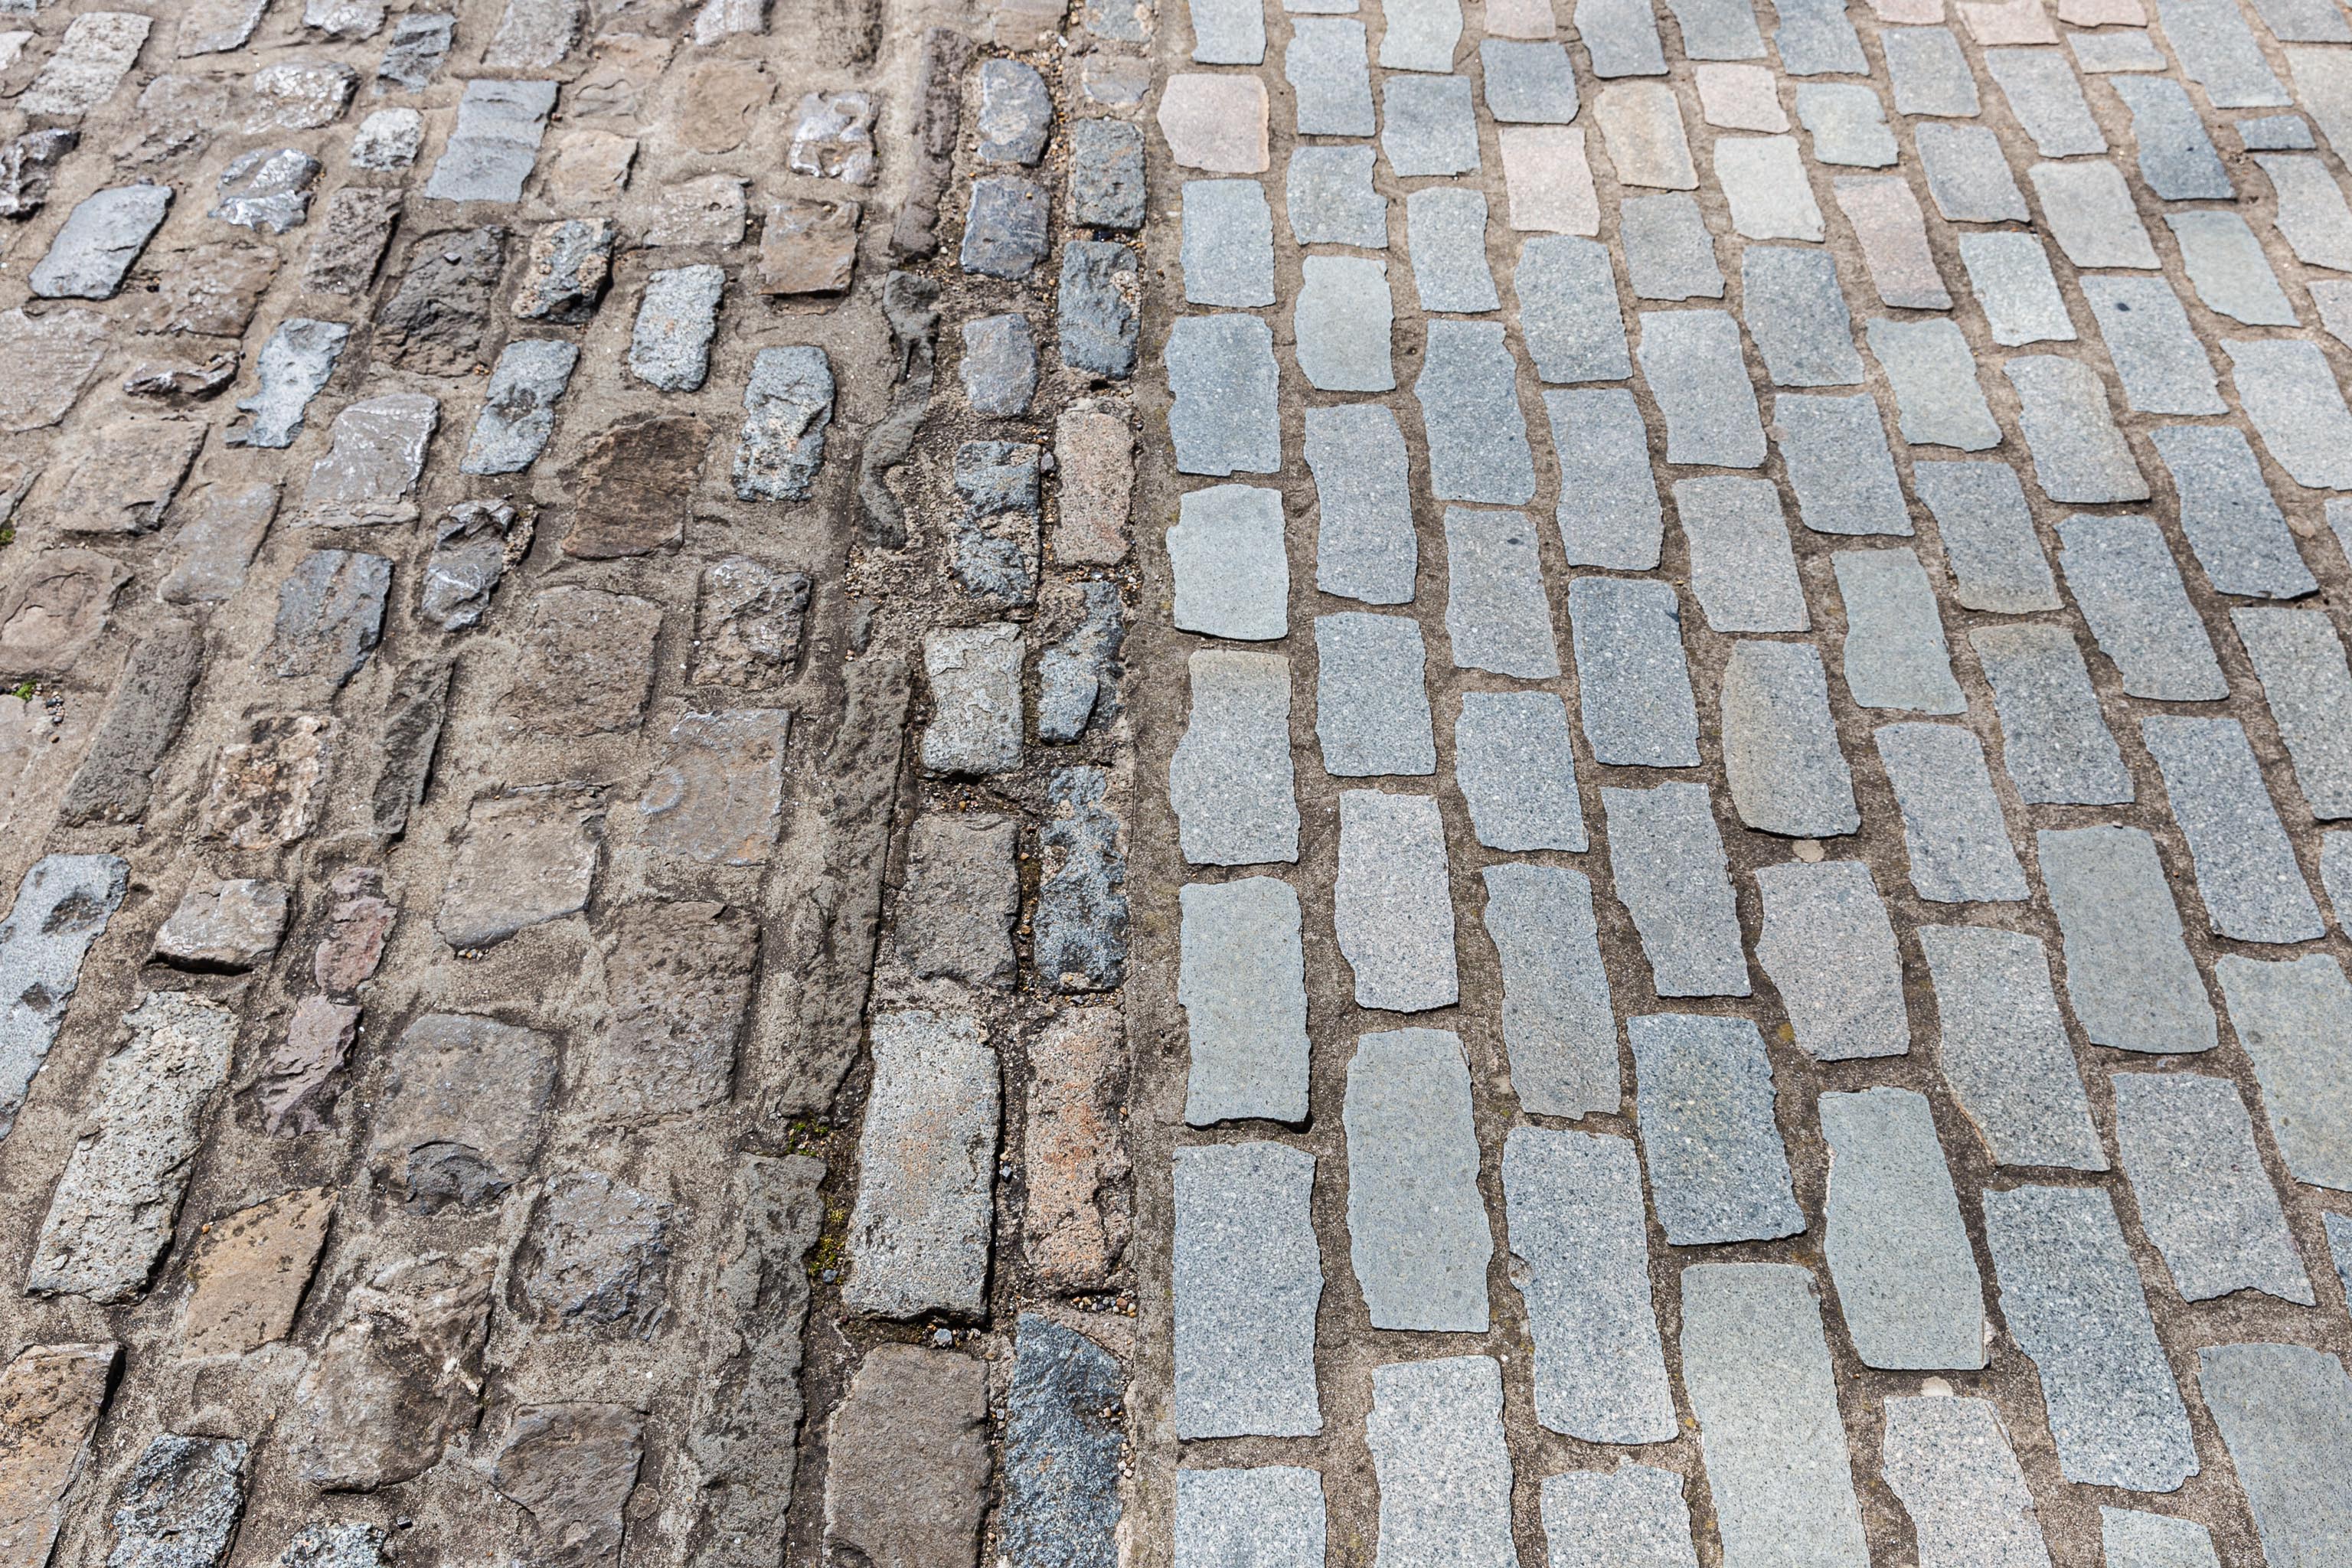 Side By Side
Just around the corner, you can see the old and newly-halved-and-relaid cobbles next to each other. (Technically I think these are actually setts,...